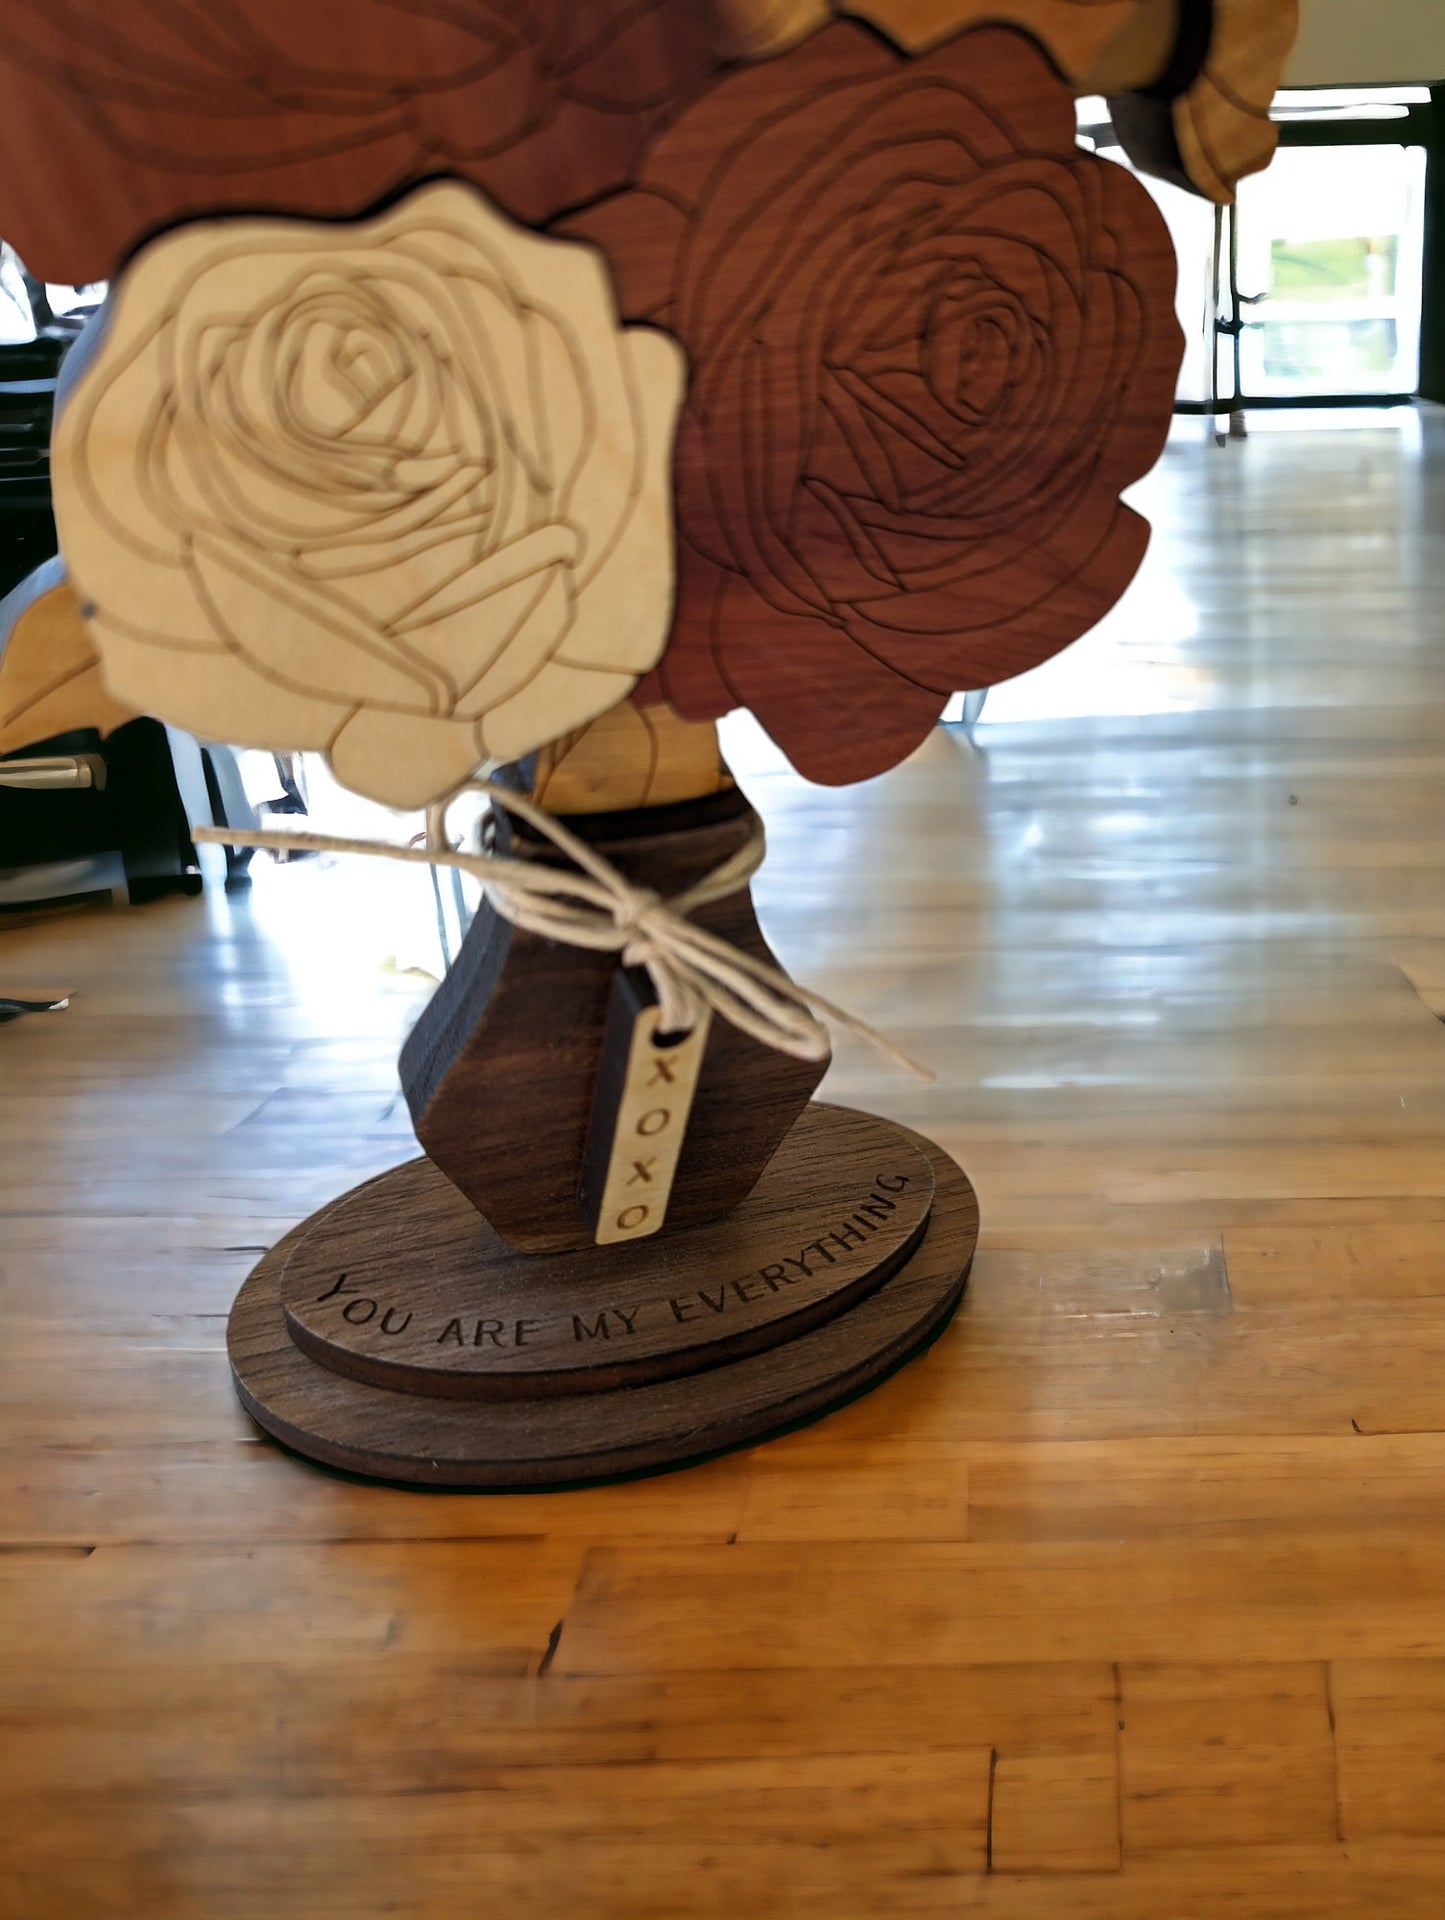 Everlasting Blooms: Handcrafted wooden rose floral bouquets with personalization for gift giving